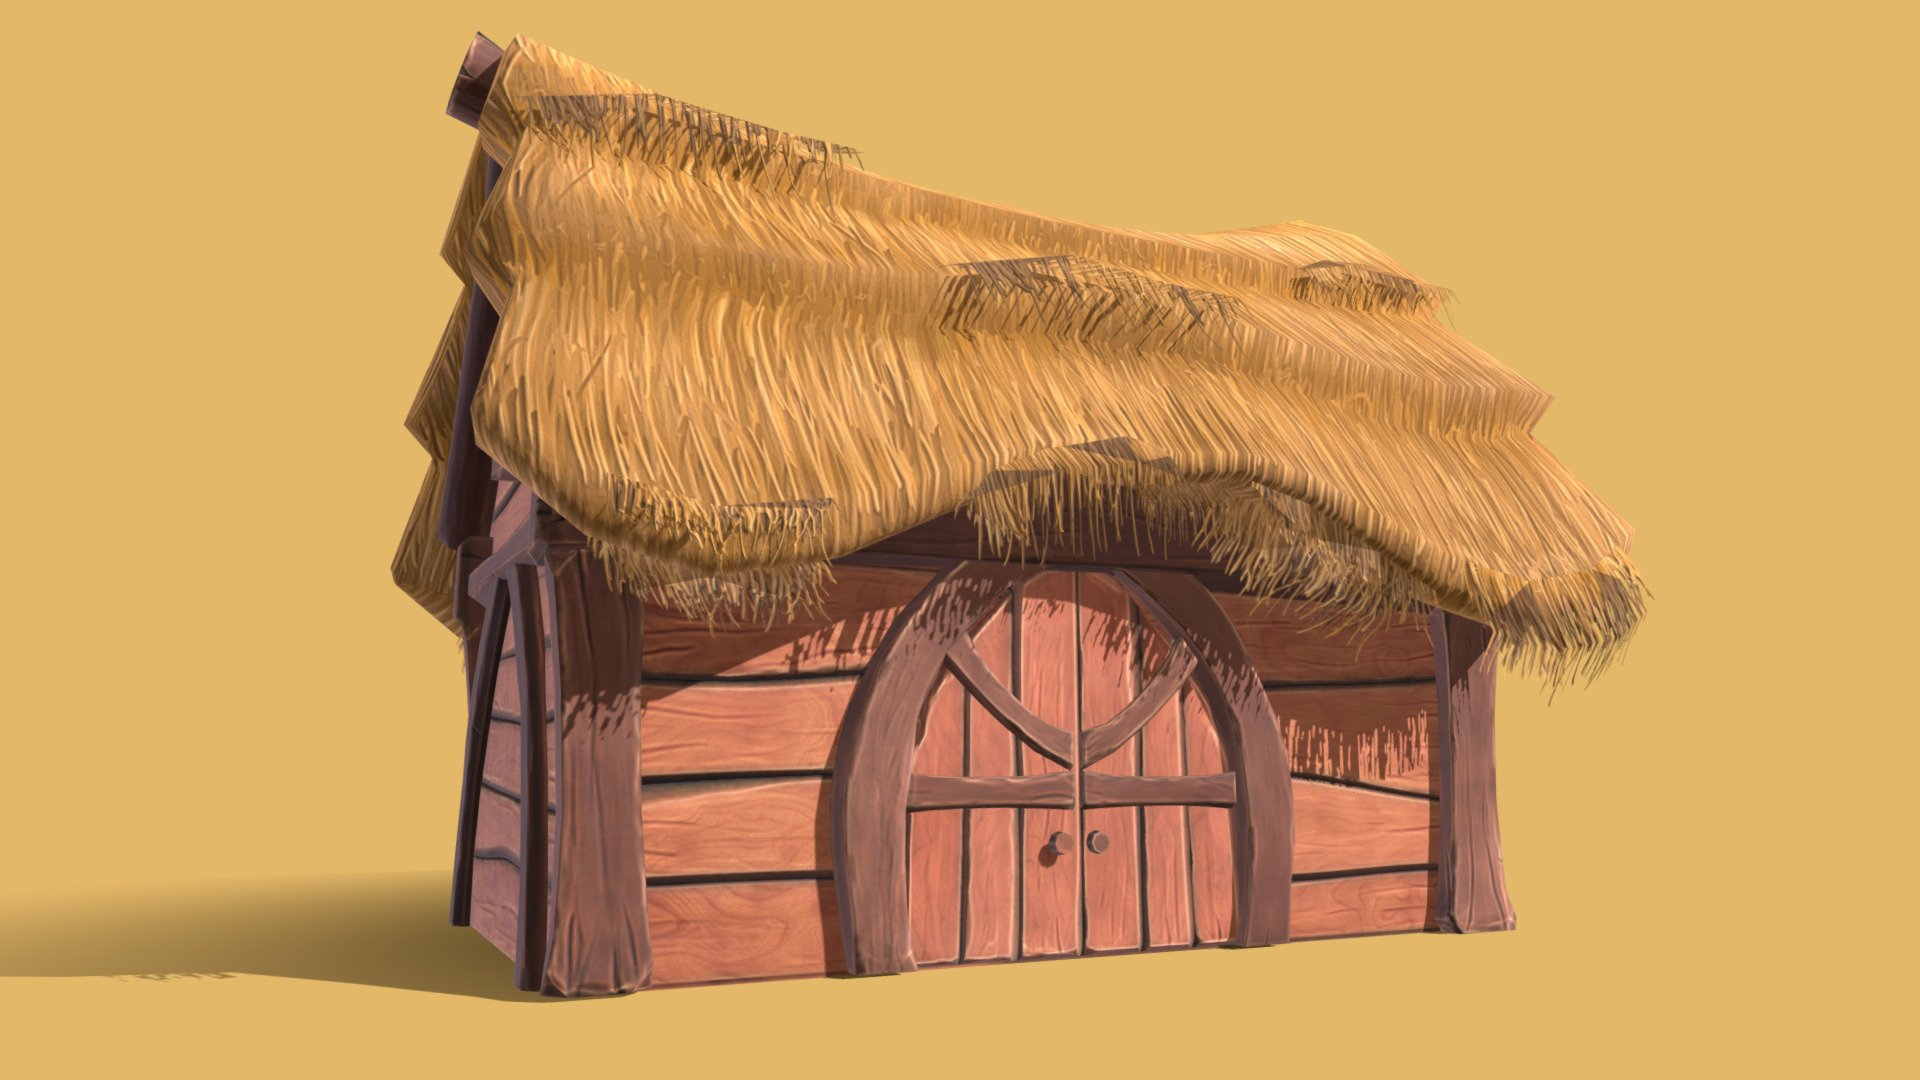 A mediecal village barn building stylized. Process hipoly zbrush -&gt; textures bake -&gt; retopology - Village Barn - 3D model by DIStudios (@distudios_) 3d model